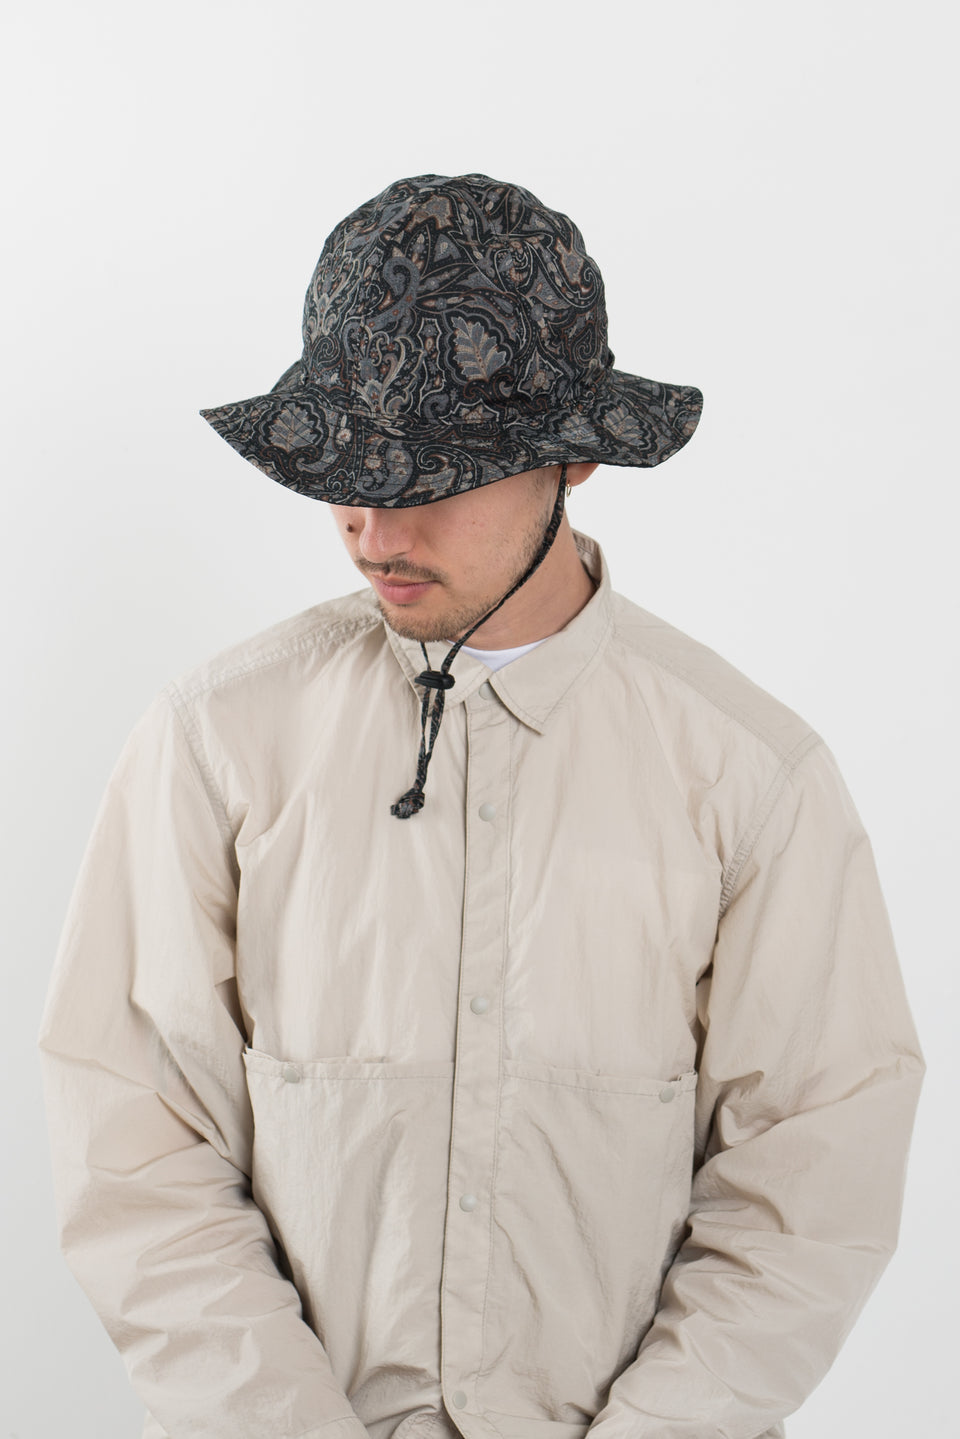 Found Feather SS22 Japan Reversible Military Sun Hat Yoryu Black / Paisley Calculus Victoria BC Canada